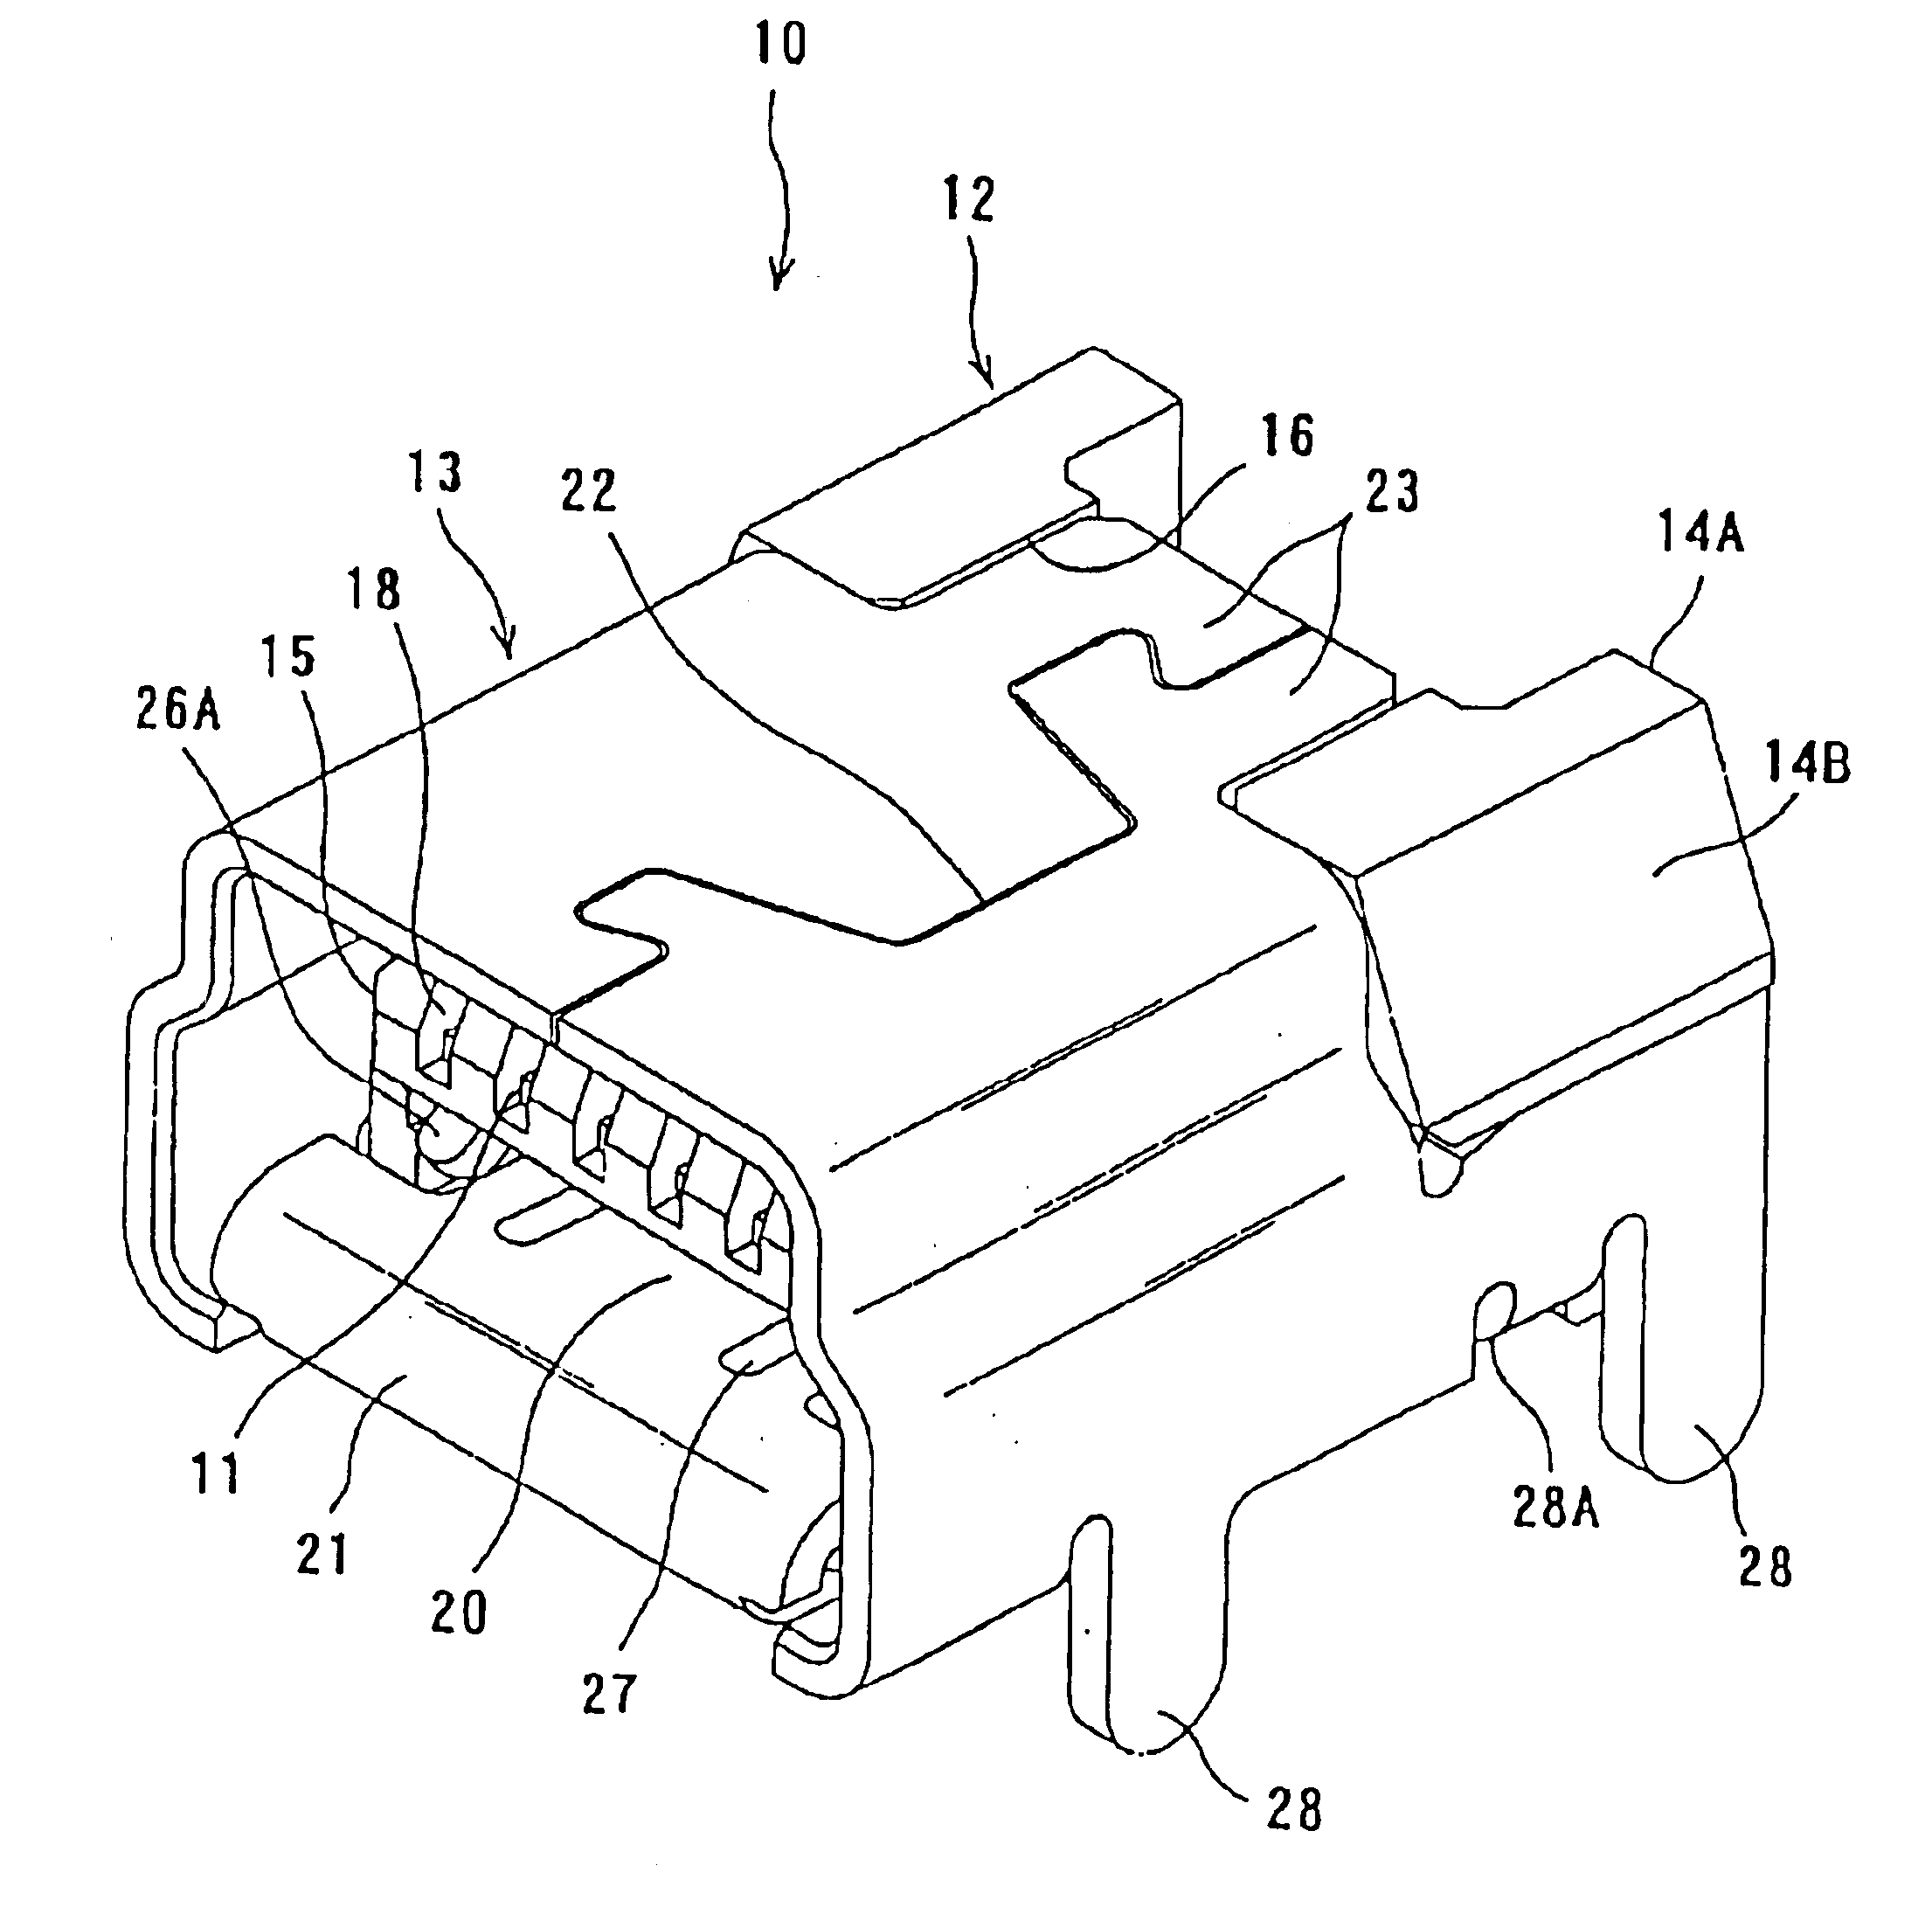 Electrical connector with lock and shield pieces in middle plane